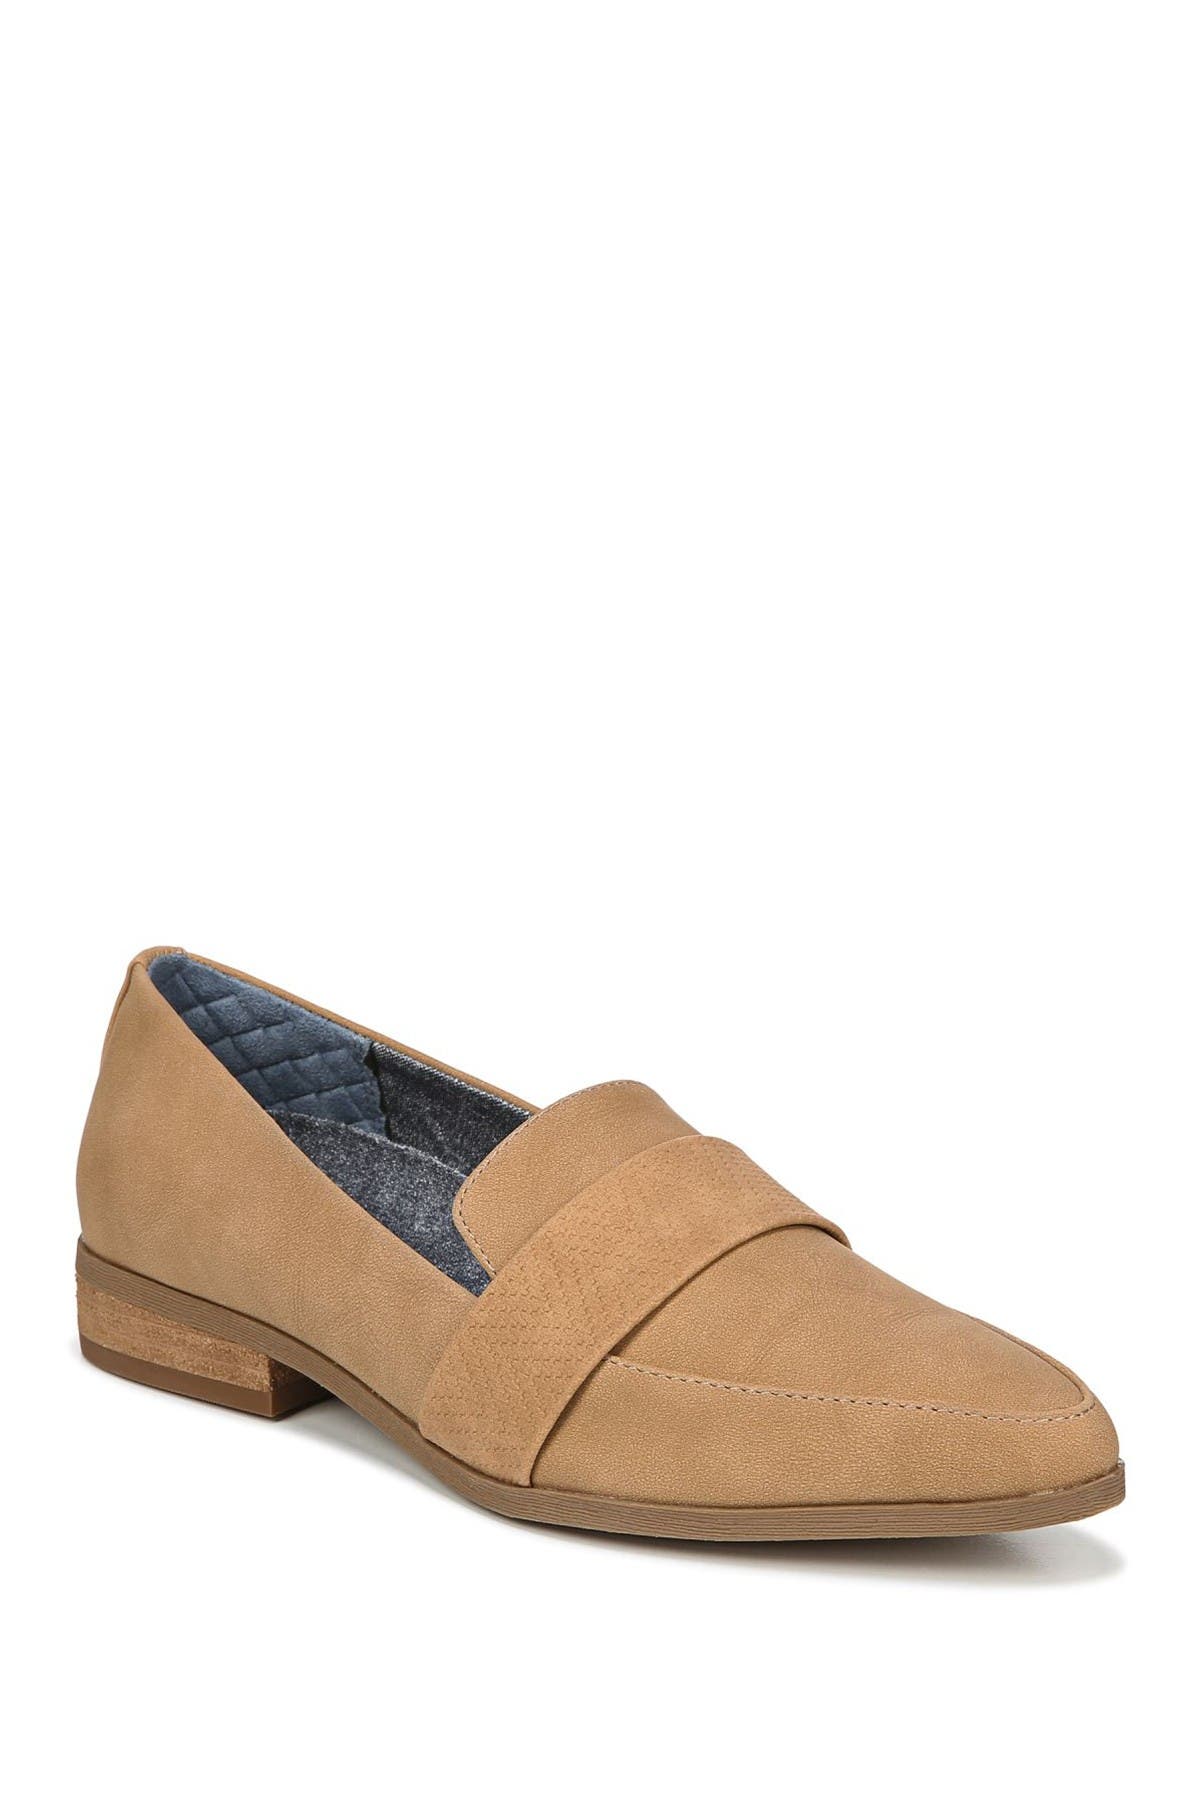 dr scholl's daily loafer